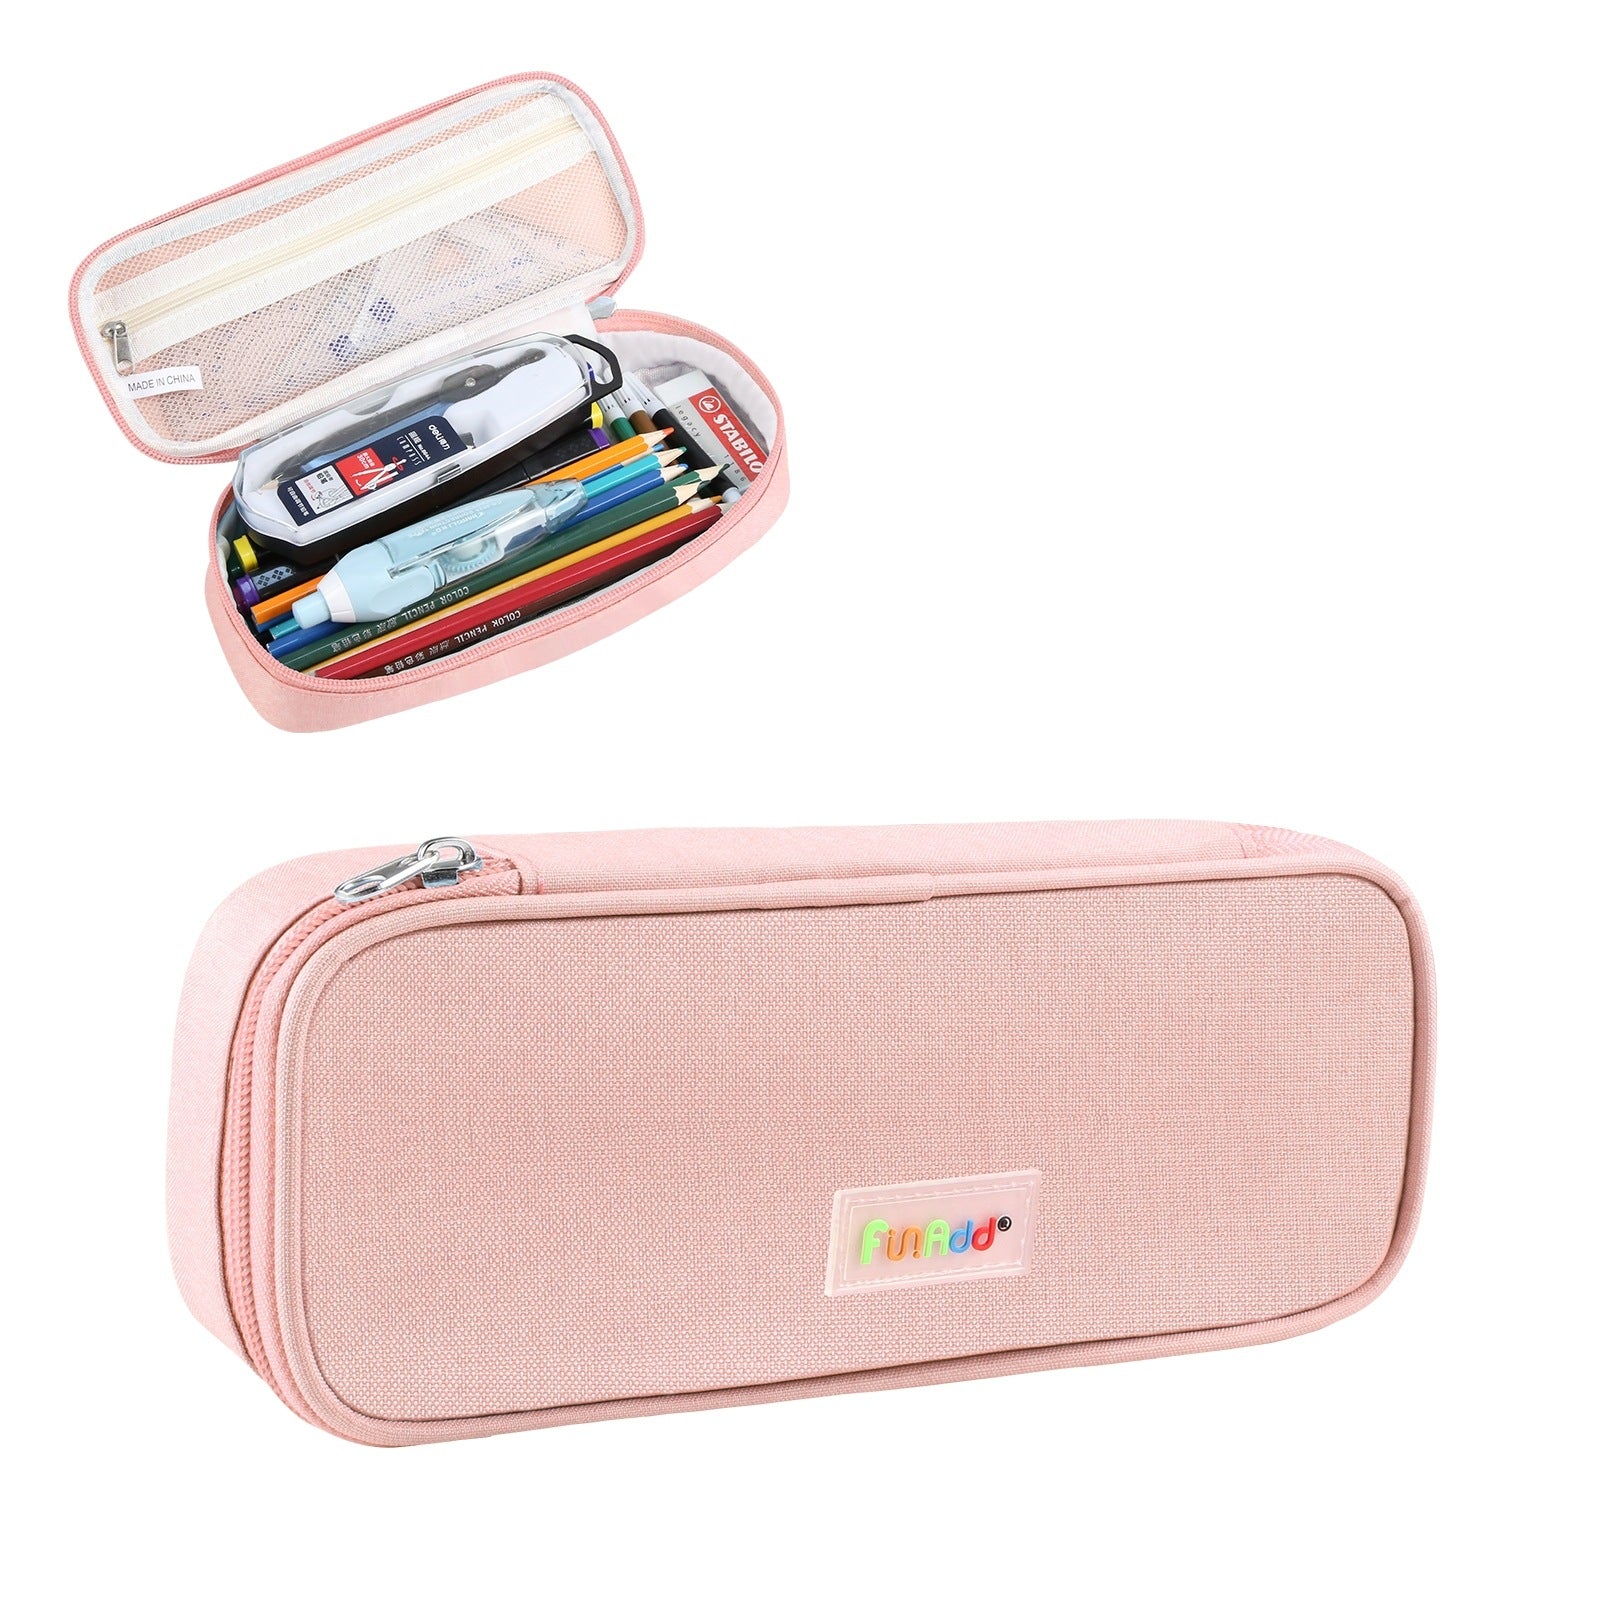 AddFun Large Capacity Pen Case,Pencil Pouch with Zipper